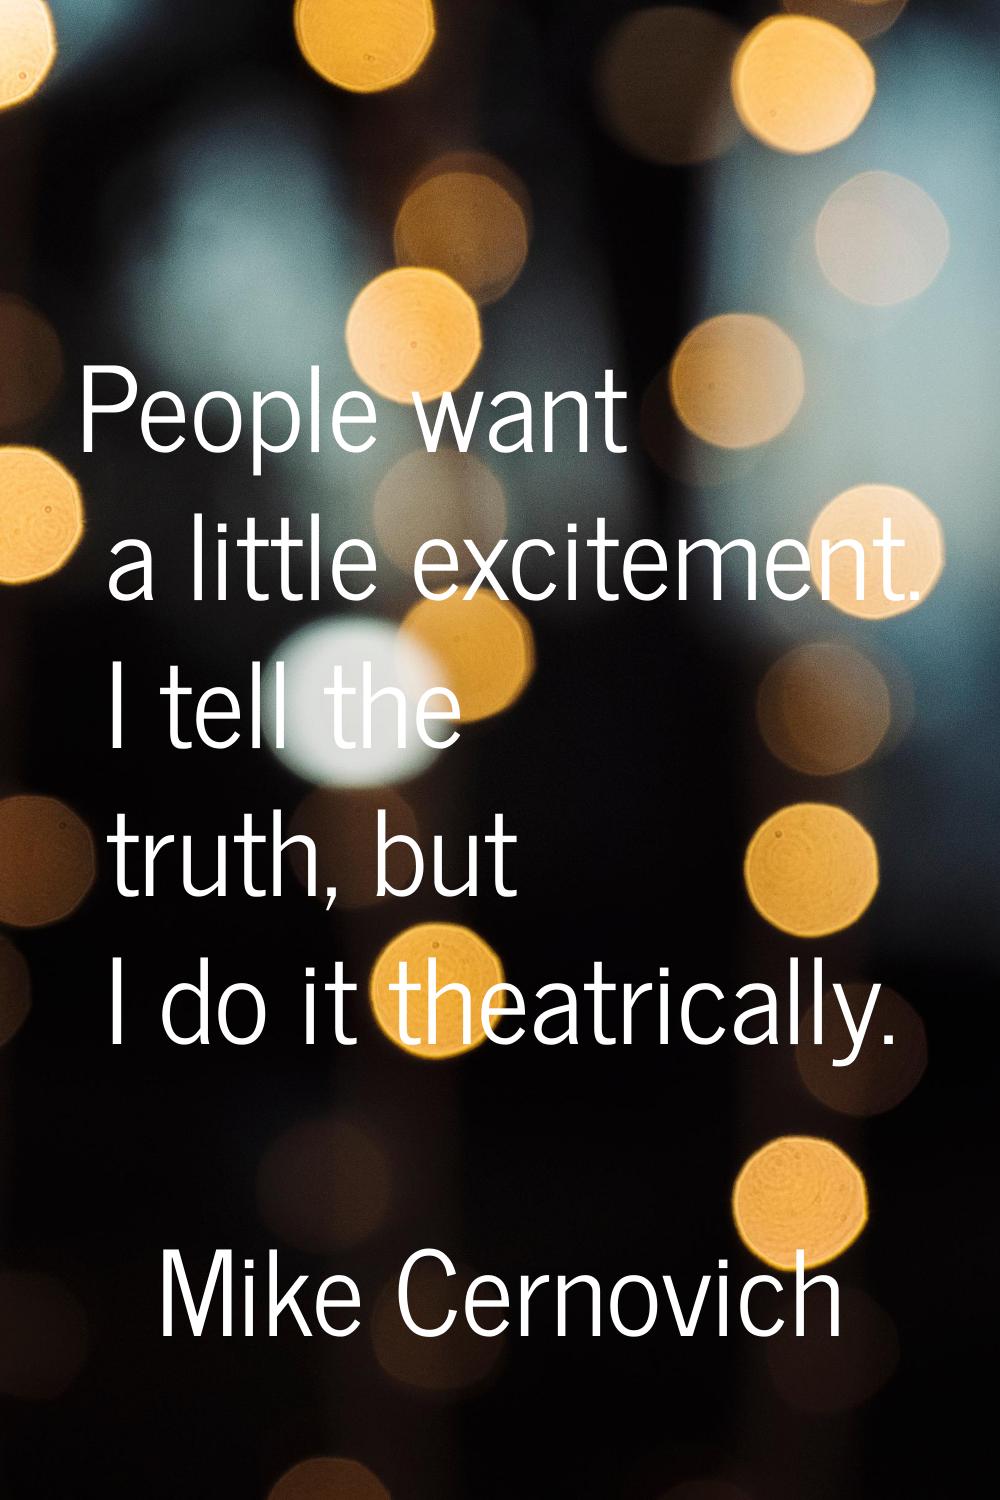 People want a little excitement. I tell the truth, but I do it theatrically.